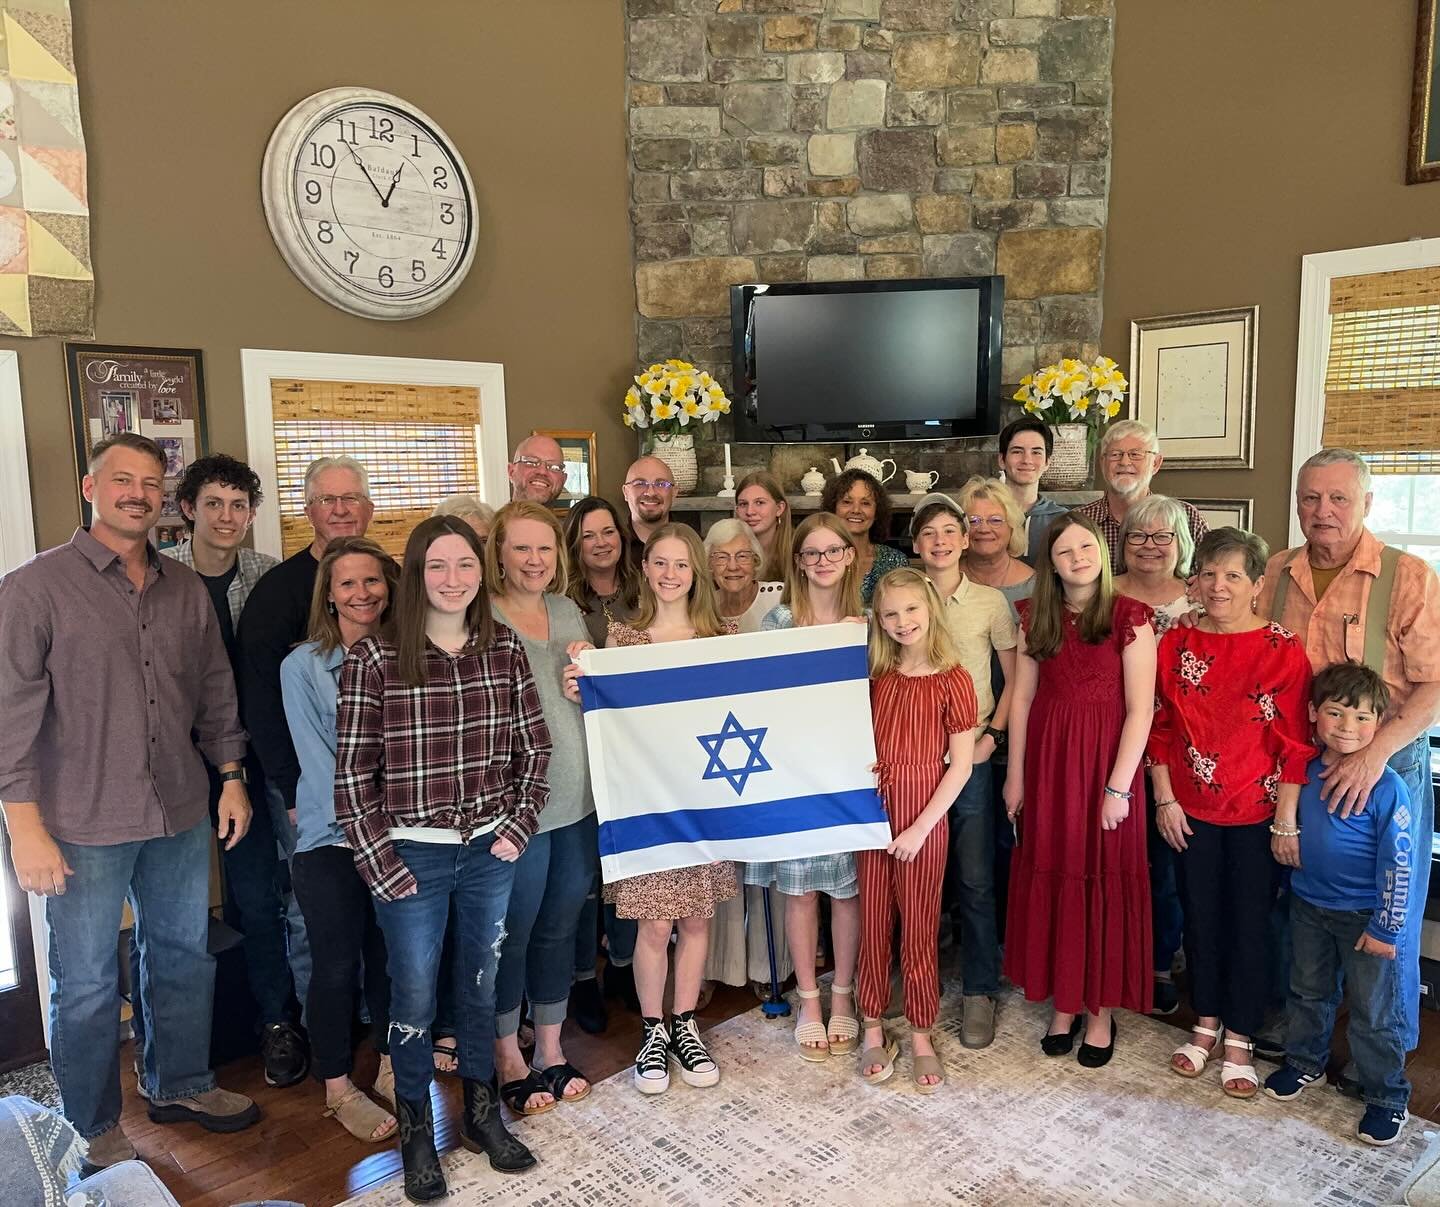 New Testament Christian Fellowship in Claremont, North Carolina loves and prays for the people of Israel.